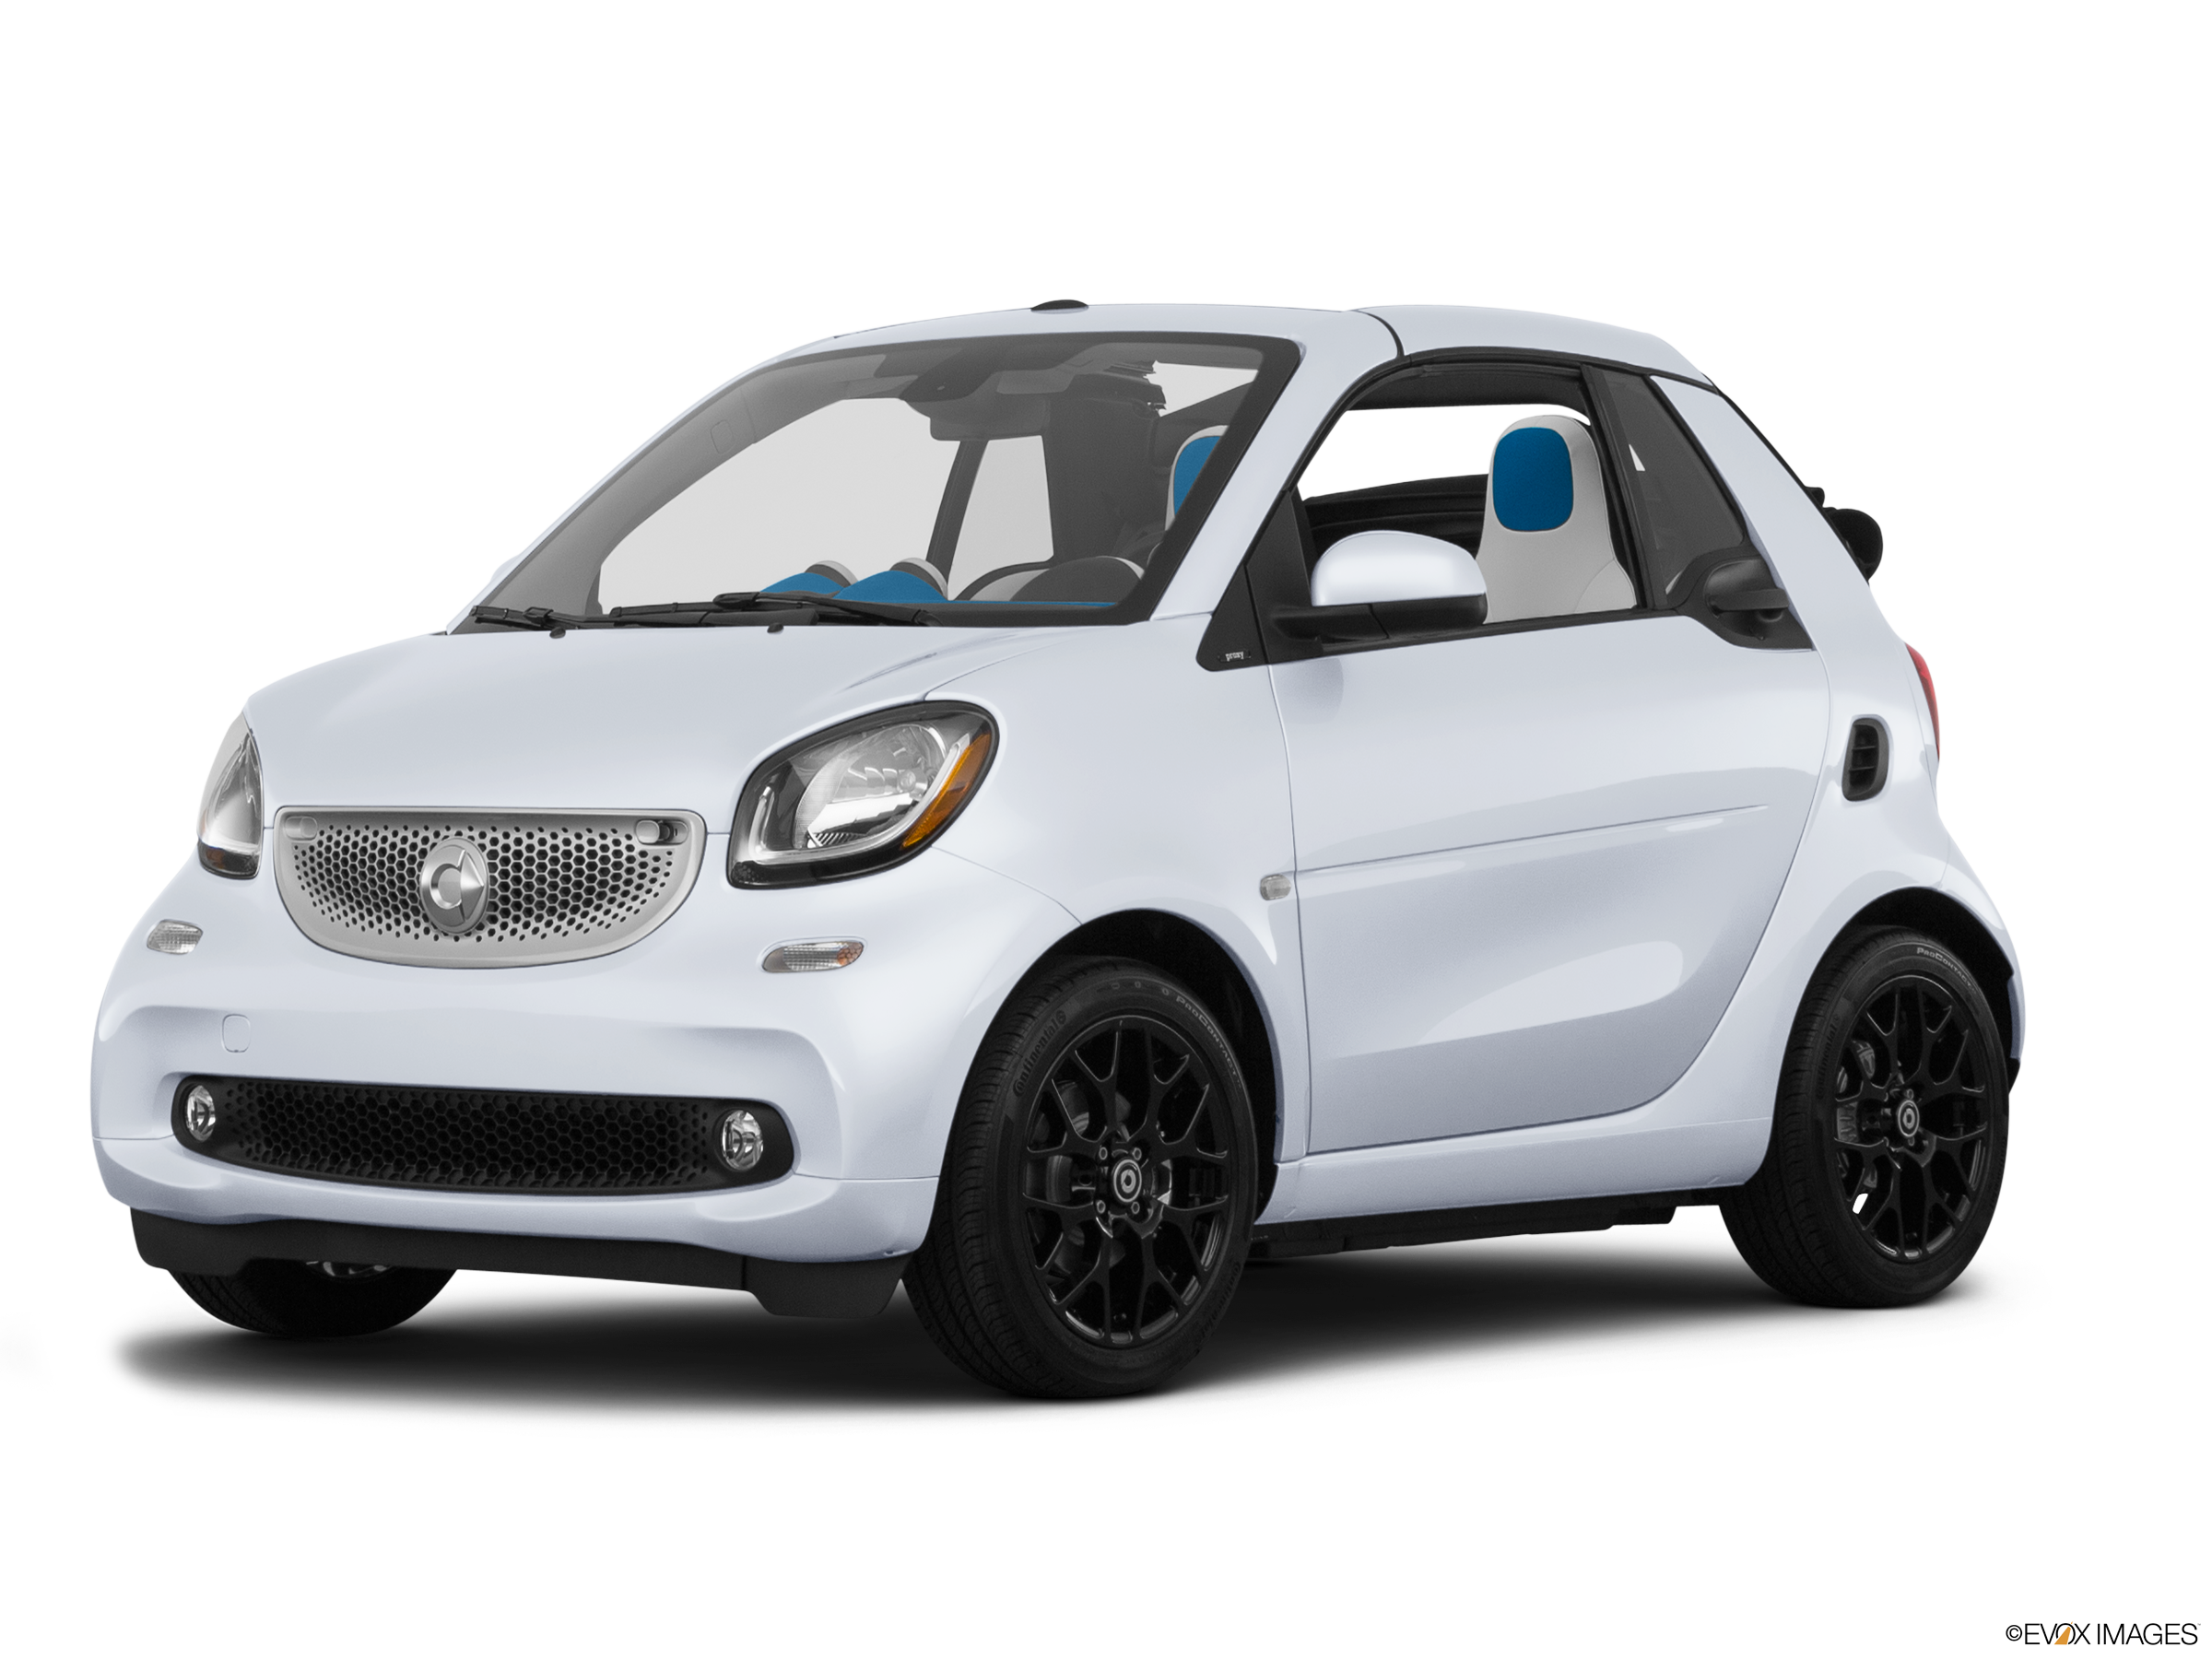 2015 smart fortwo Price, Value, Ratings & Reviews